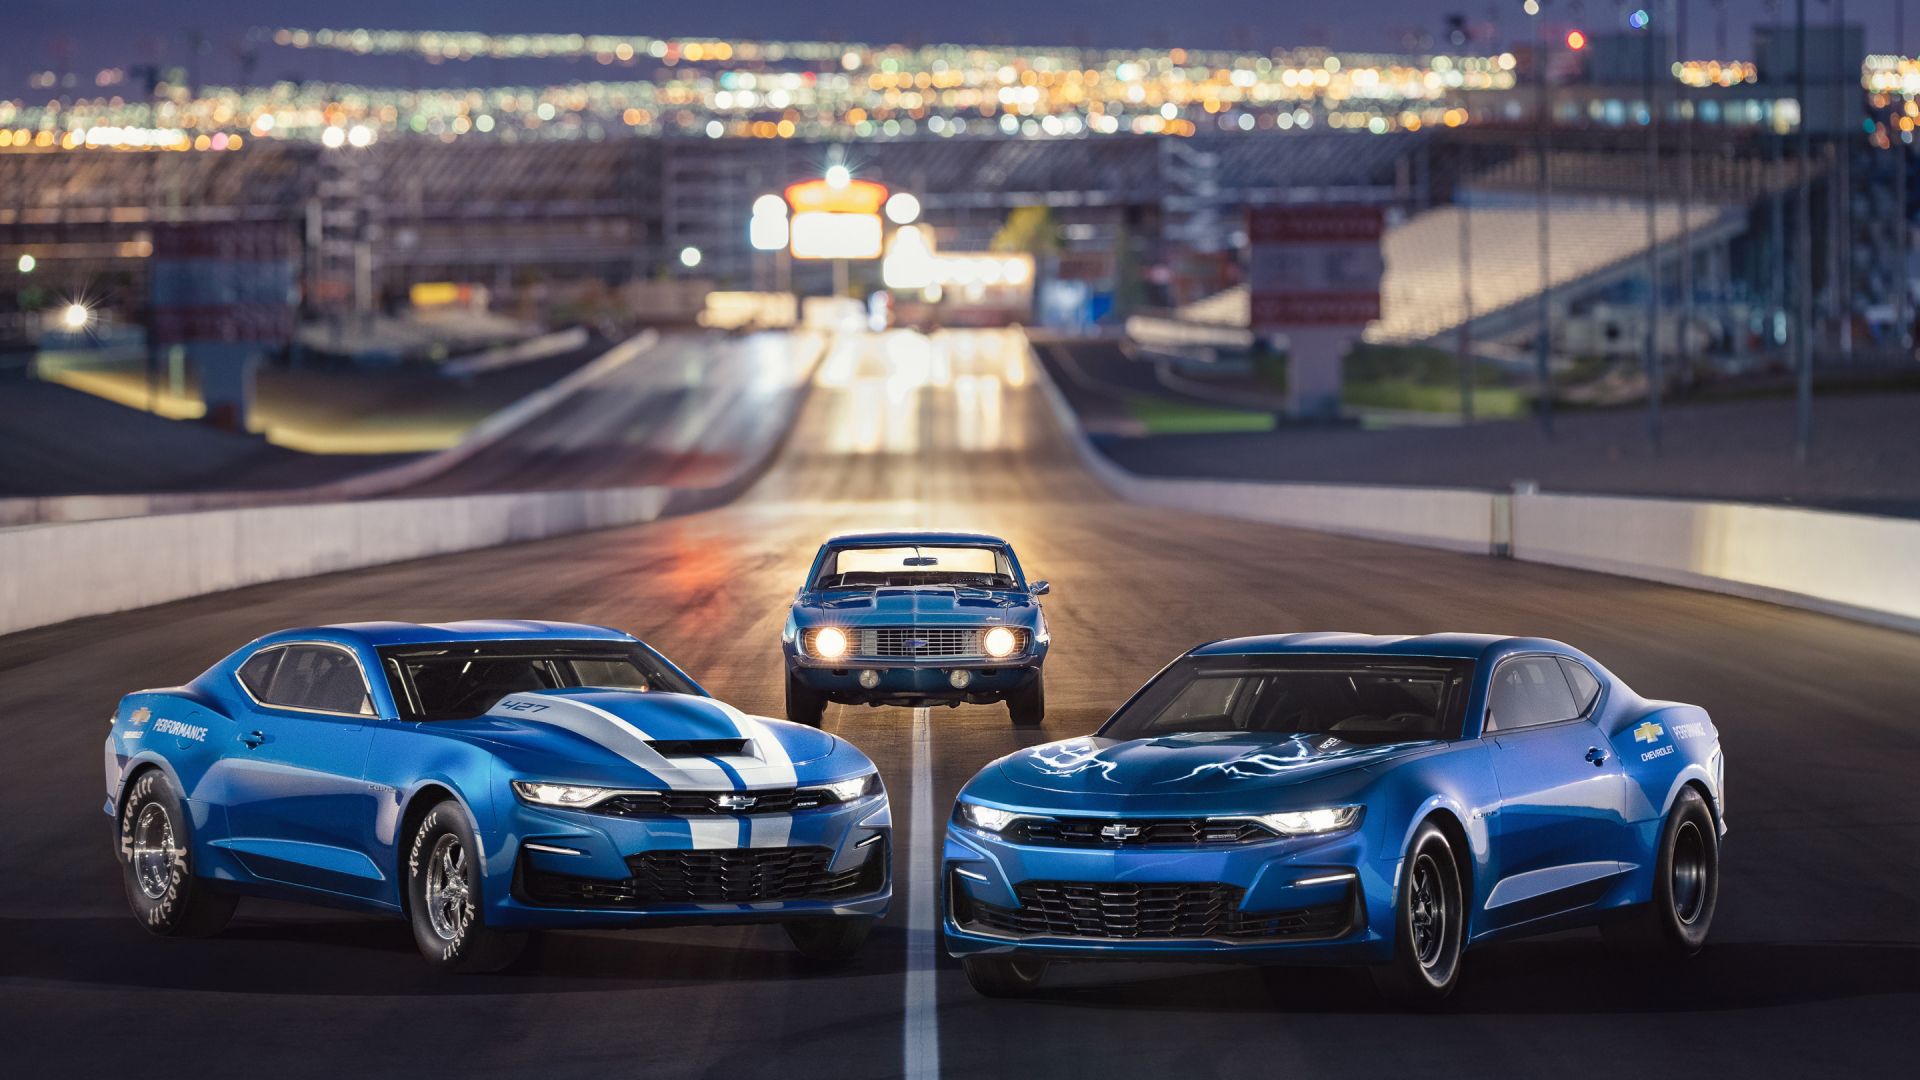 Chevrolet camaro, blue cars wallpaper, HD image, picture, background, 29b79a